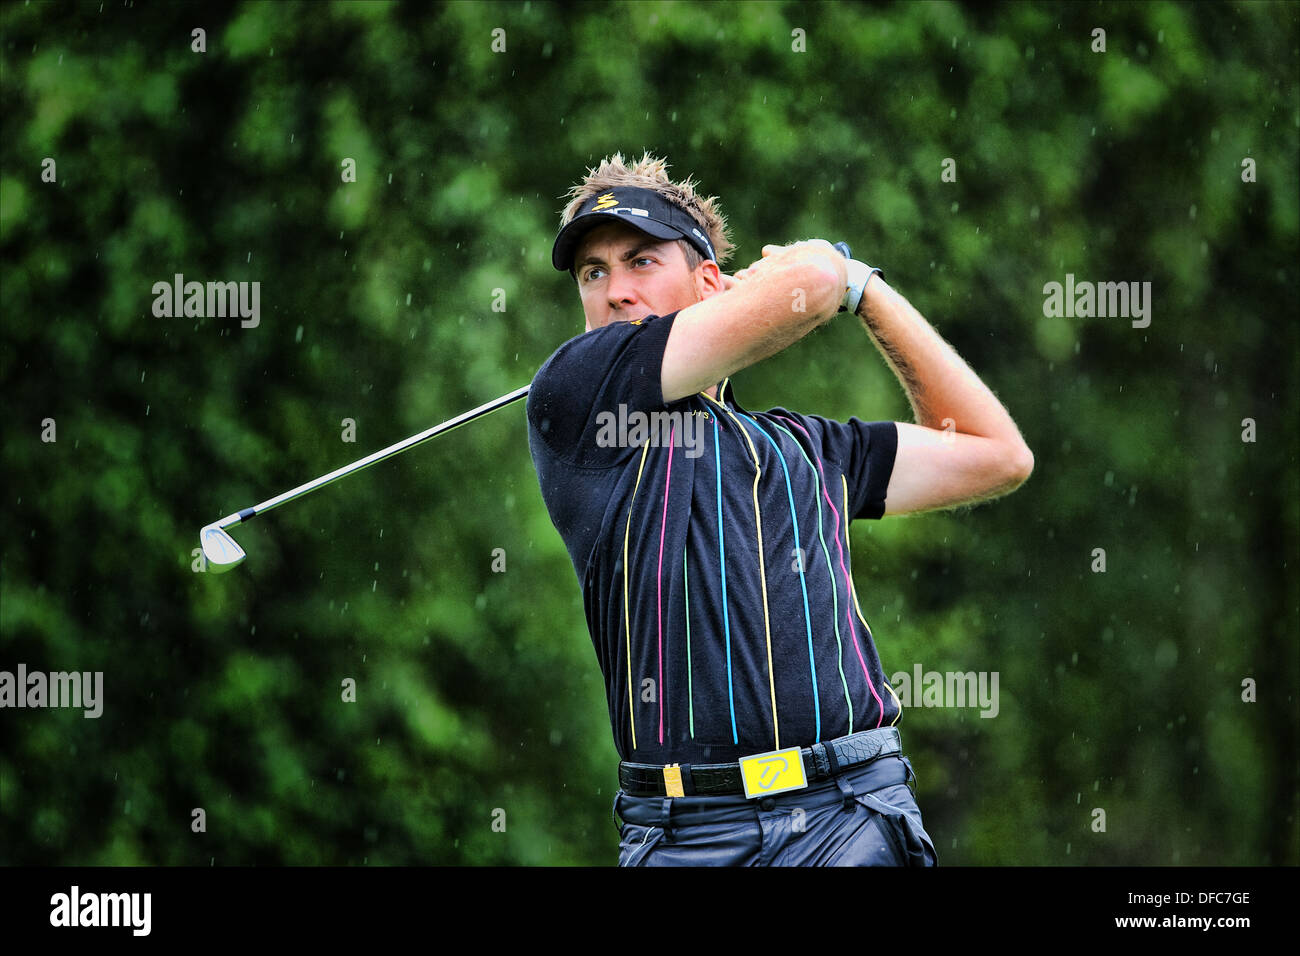 Ian Poulter playing at the Scottish Open Stock Photo